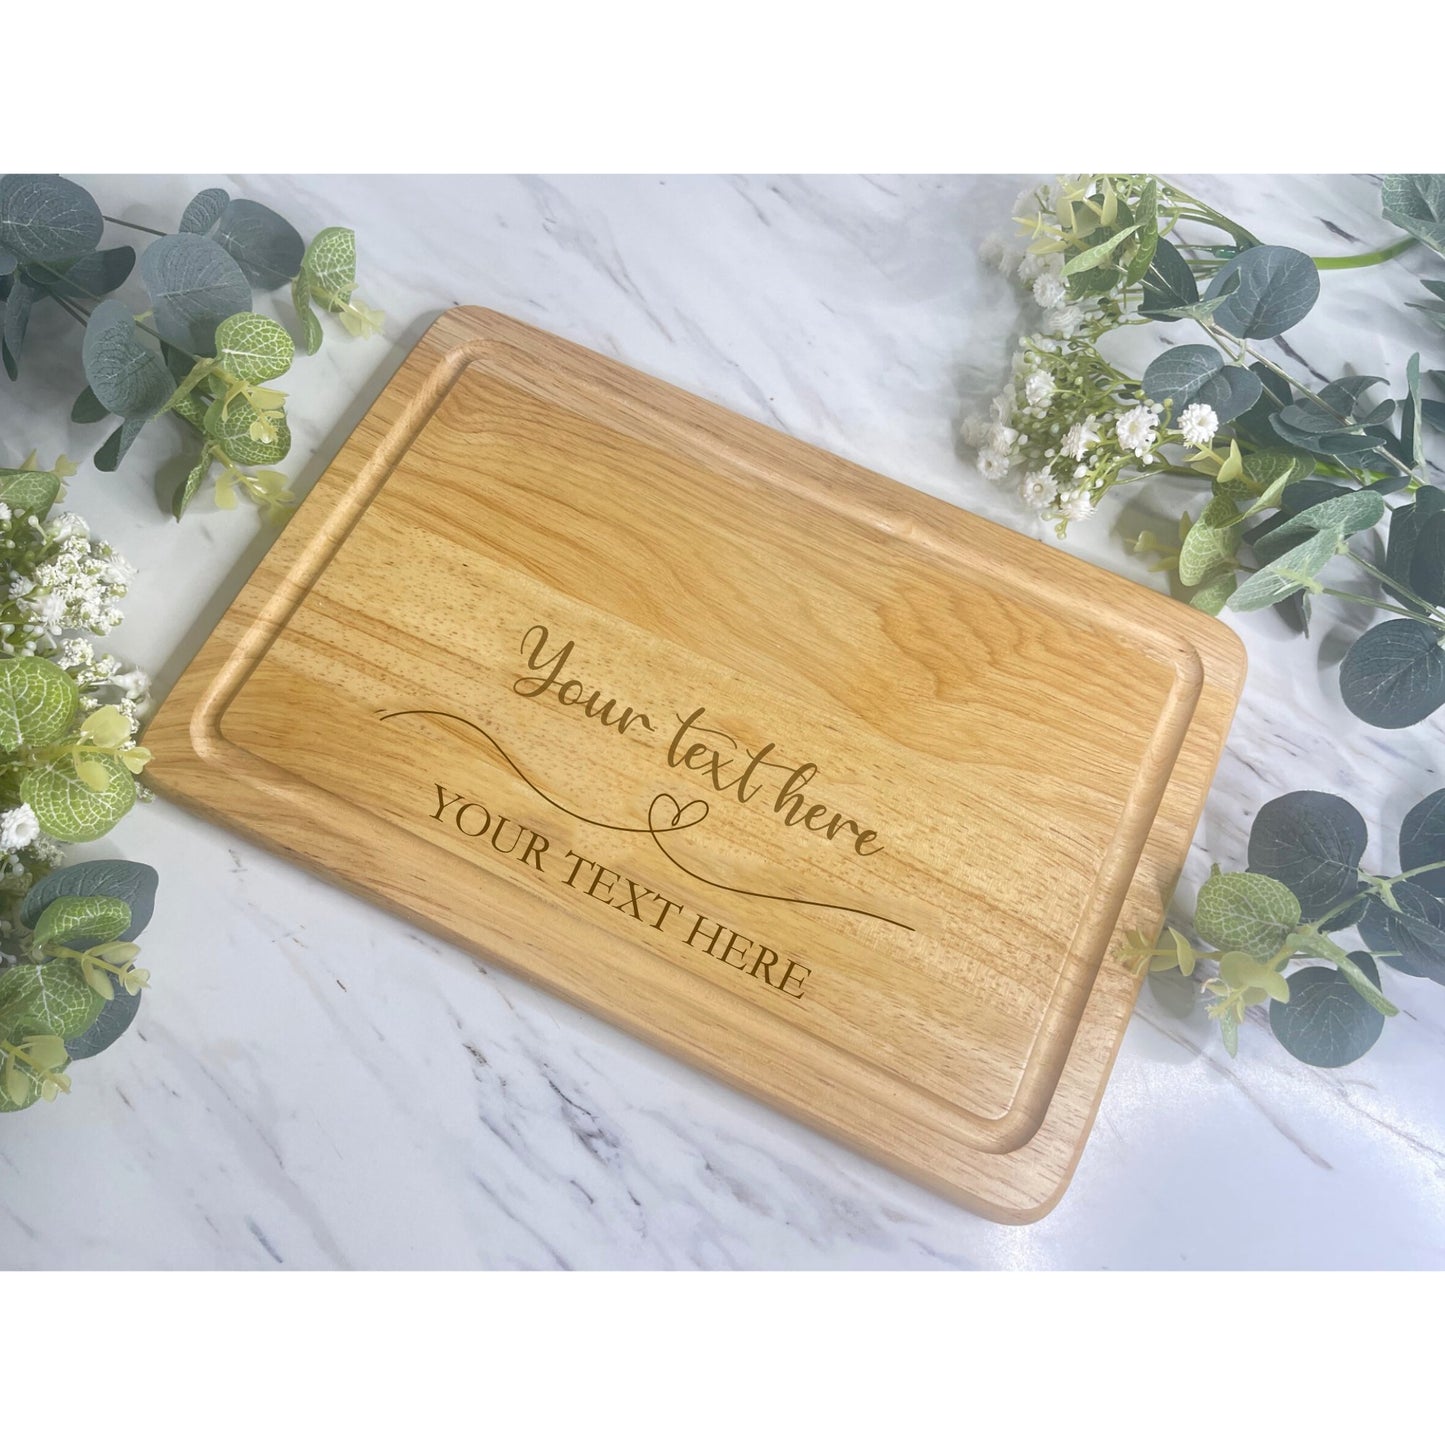 Personalised Wooden Chopping Board, Heart Line Design, You Own Text